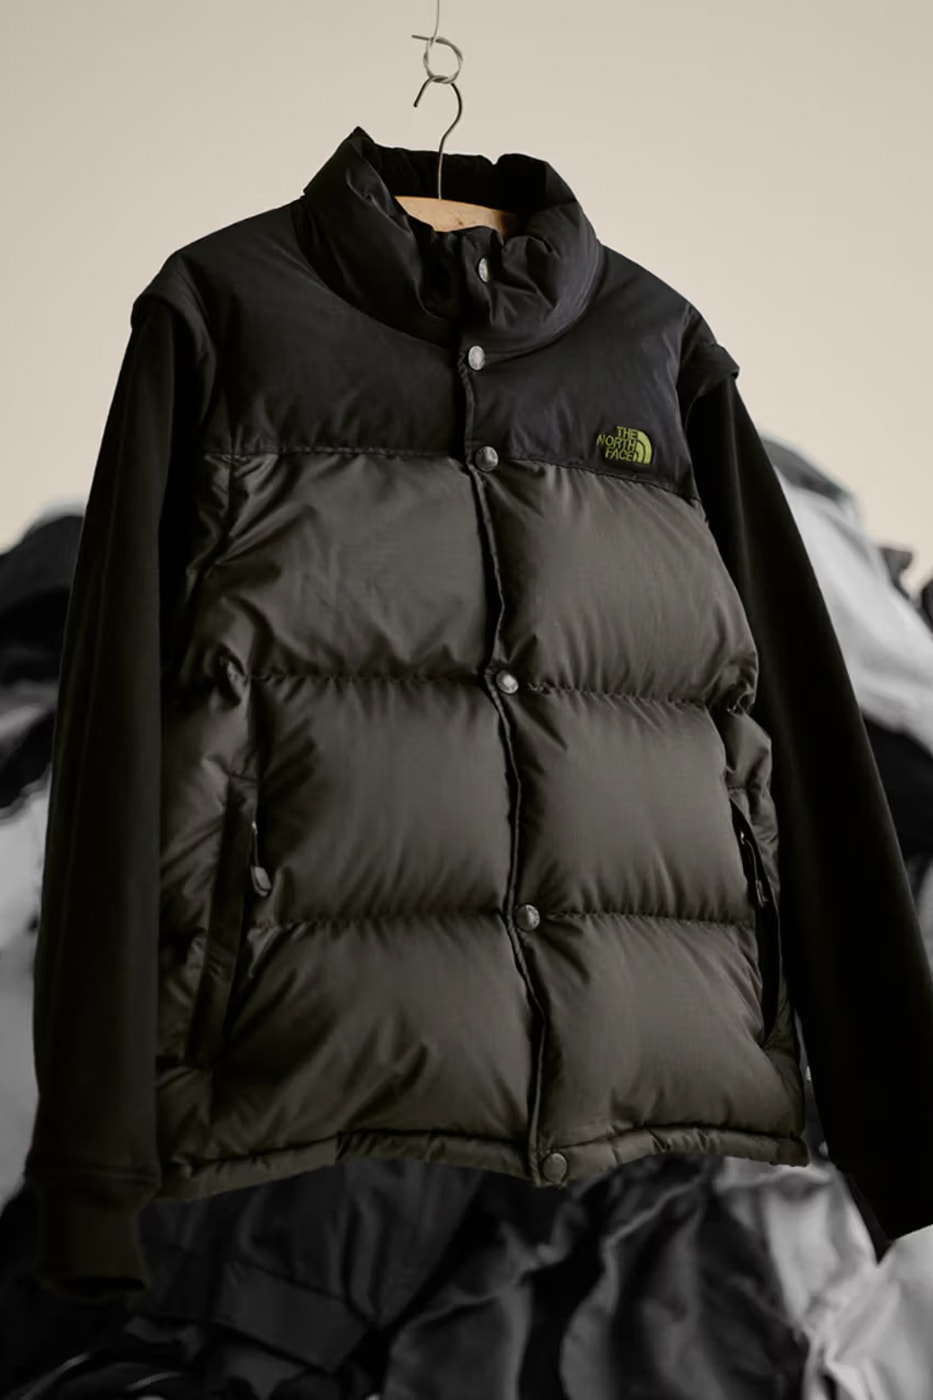 The North Face Launches Icons RMST Line